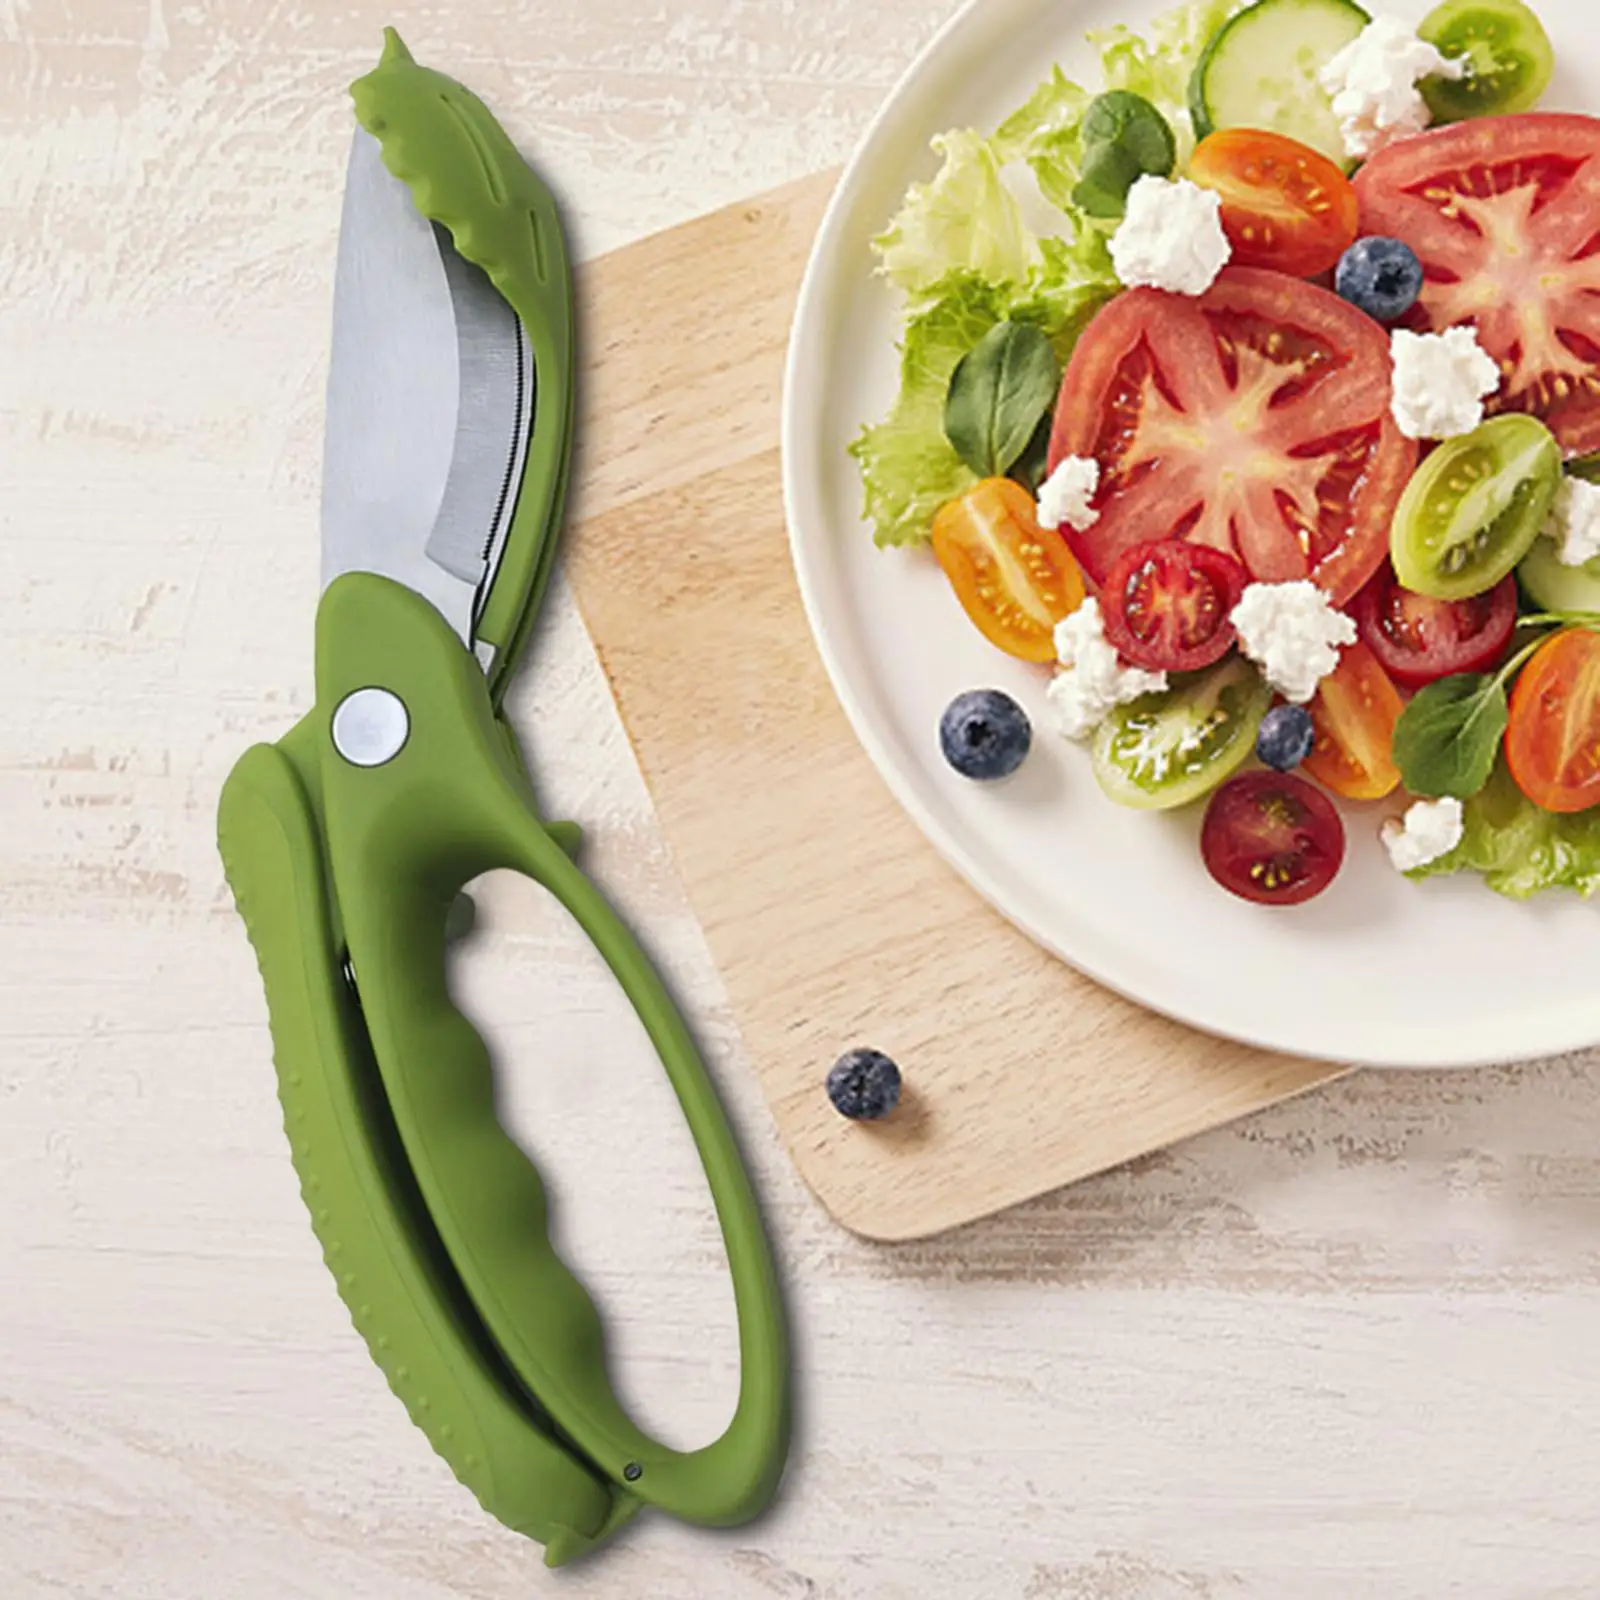 Salad Scissors Portable Stainless Steel Double Blade Kitchen Tool Salad Cutter Chopper Scissors for Lettuce Vegetable Cucumbers